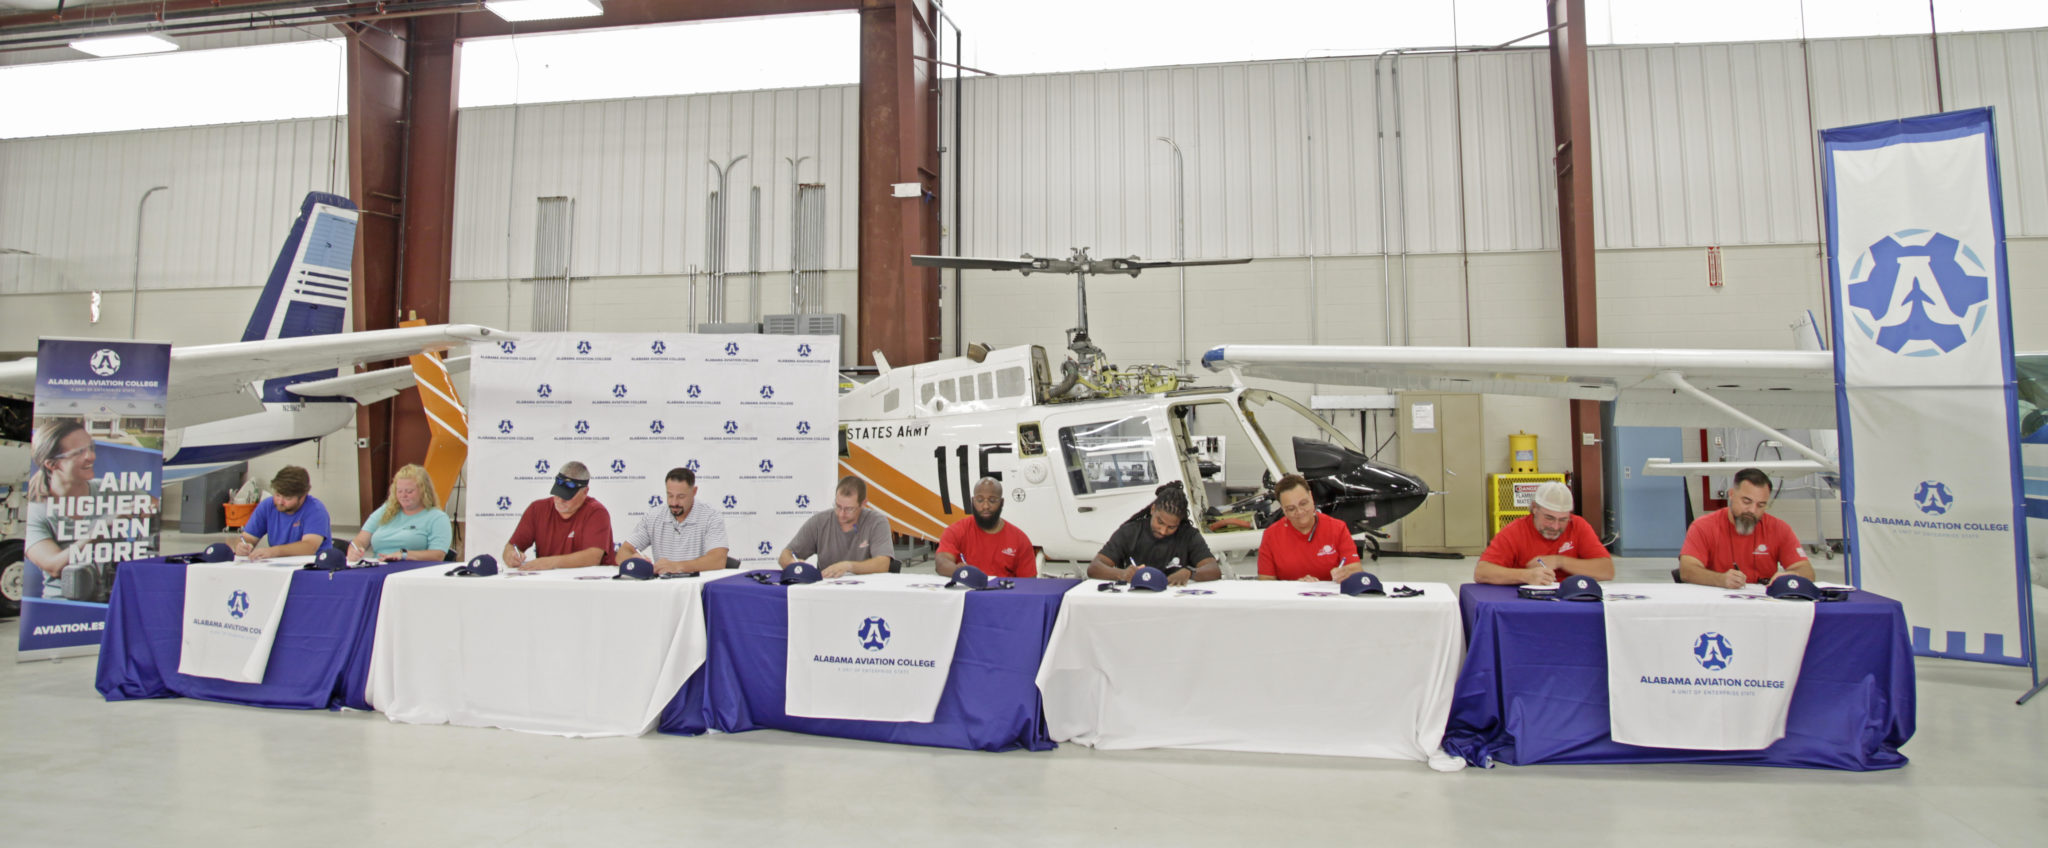 NEW APPRENTICESHIP PROGRAM TO PRODUCE AVIATION MECHANICS AND TECHNICIANS FOR FT. RUCKER AREA